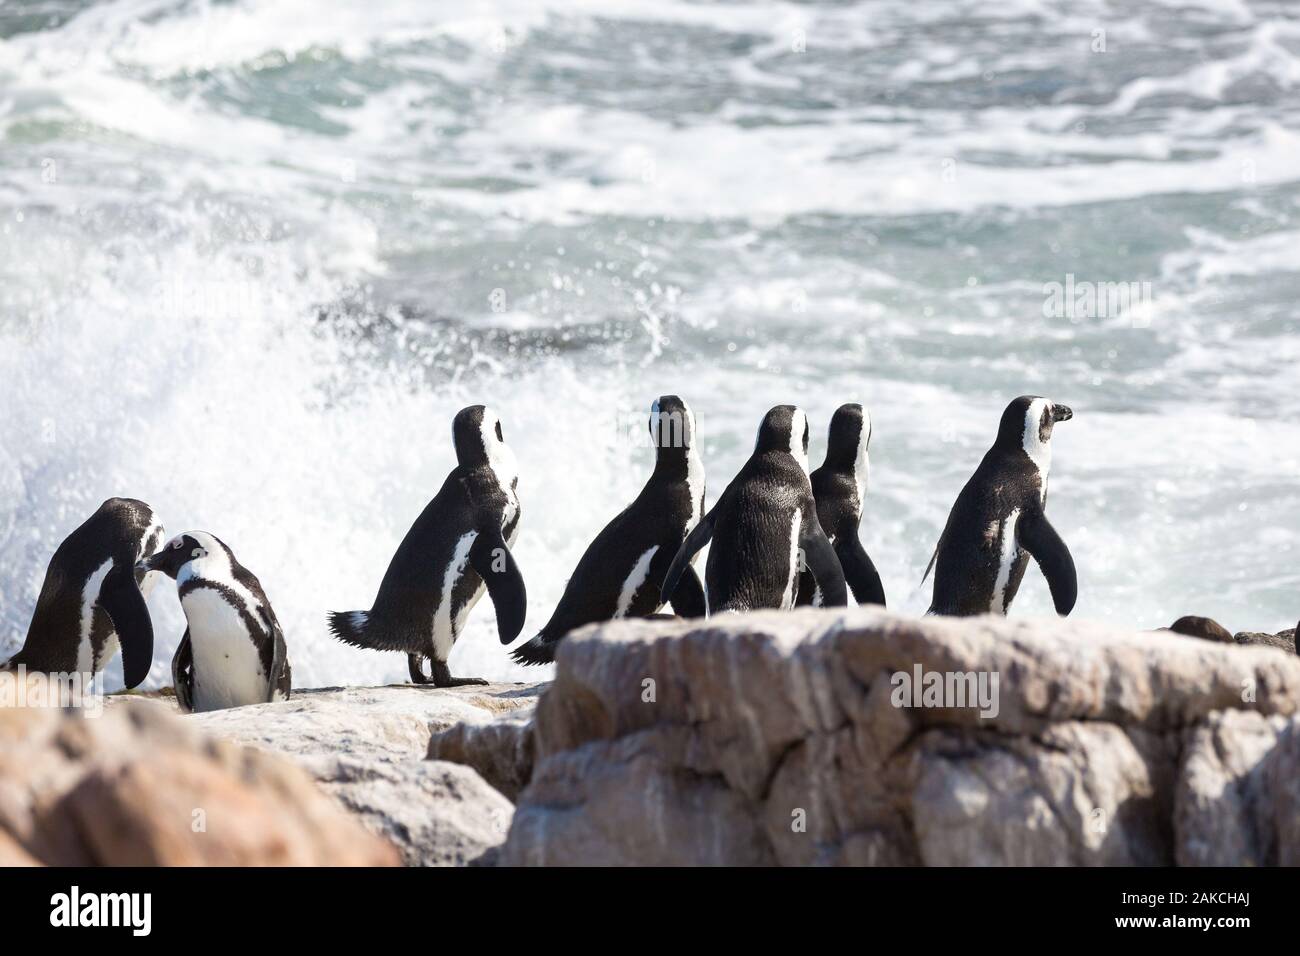 A group of African penguins (Spheniscus demersus) on a stone watching the ocean and the waves, Betty's Bay, South Africa Stock Photo